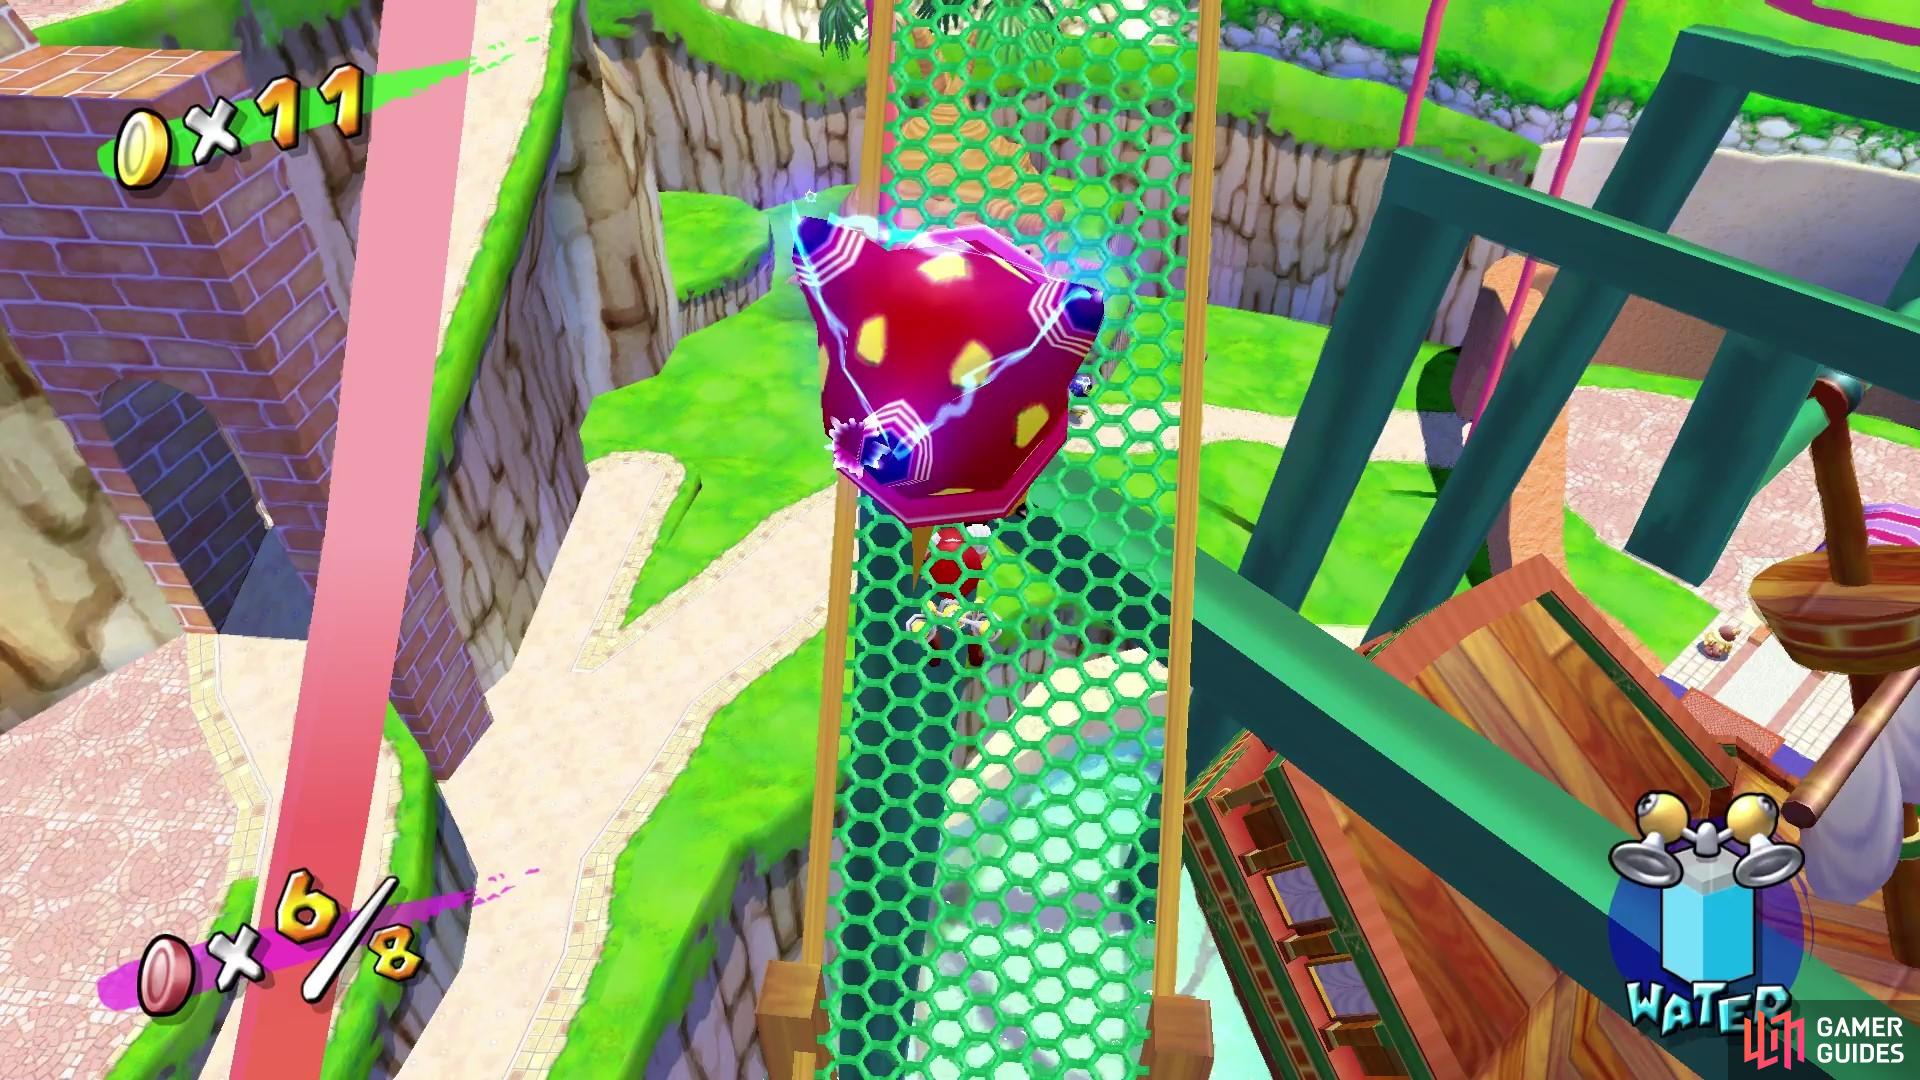 Get rid of the electrokoopas by bumping them off the paths, so they don’t electrocute you!